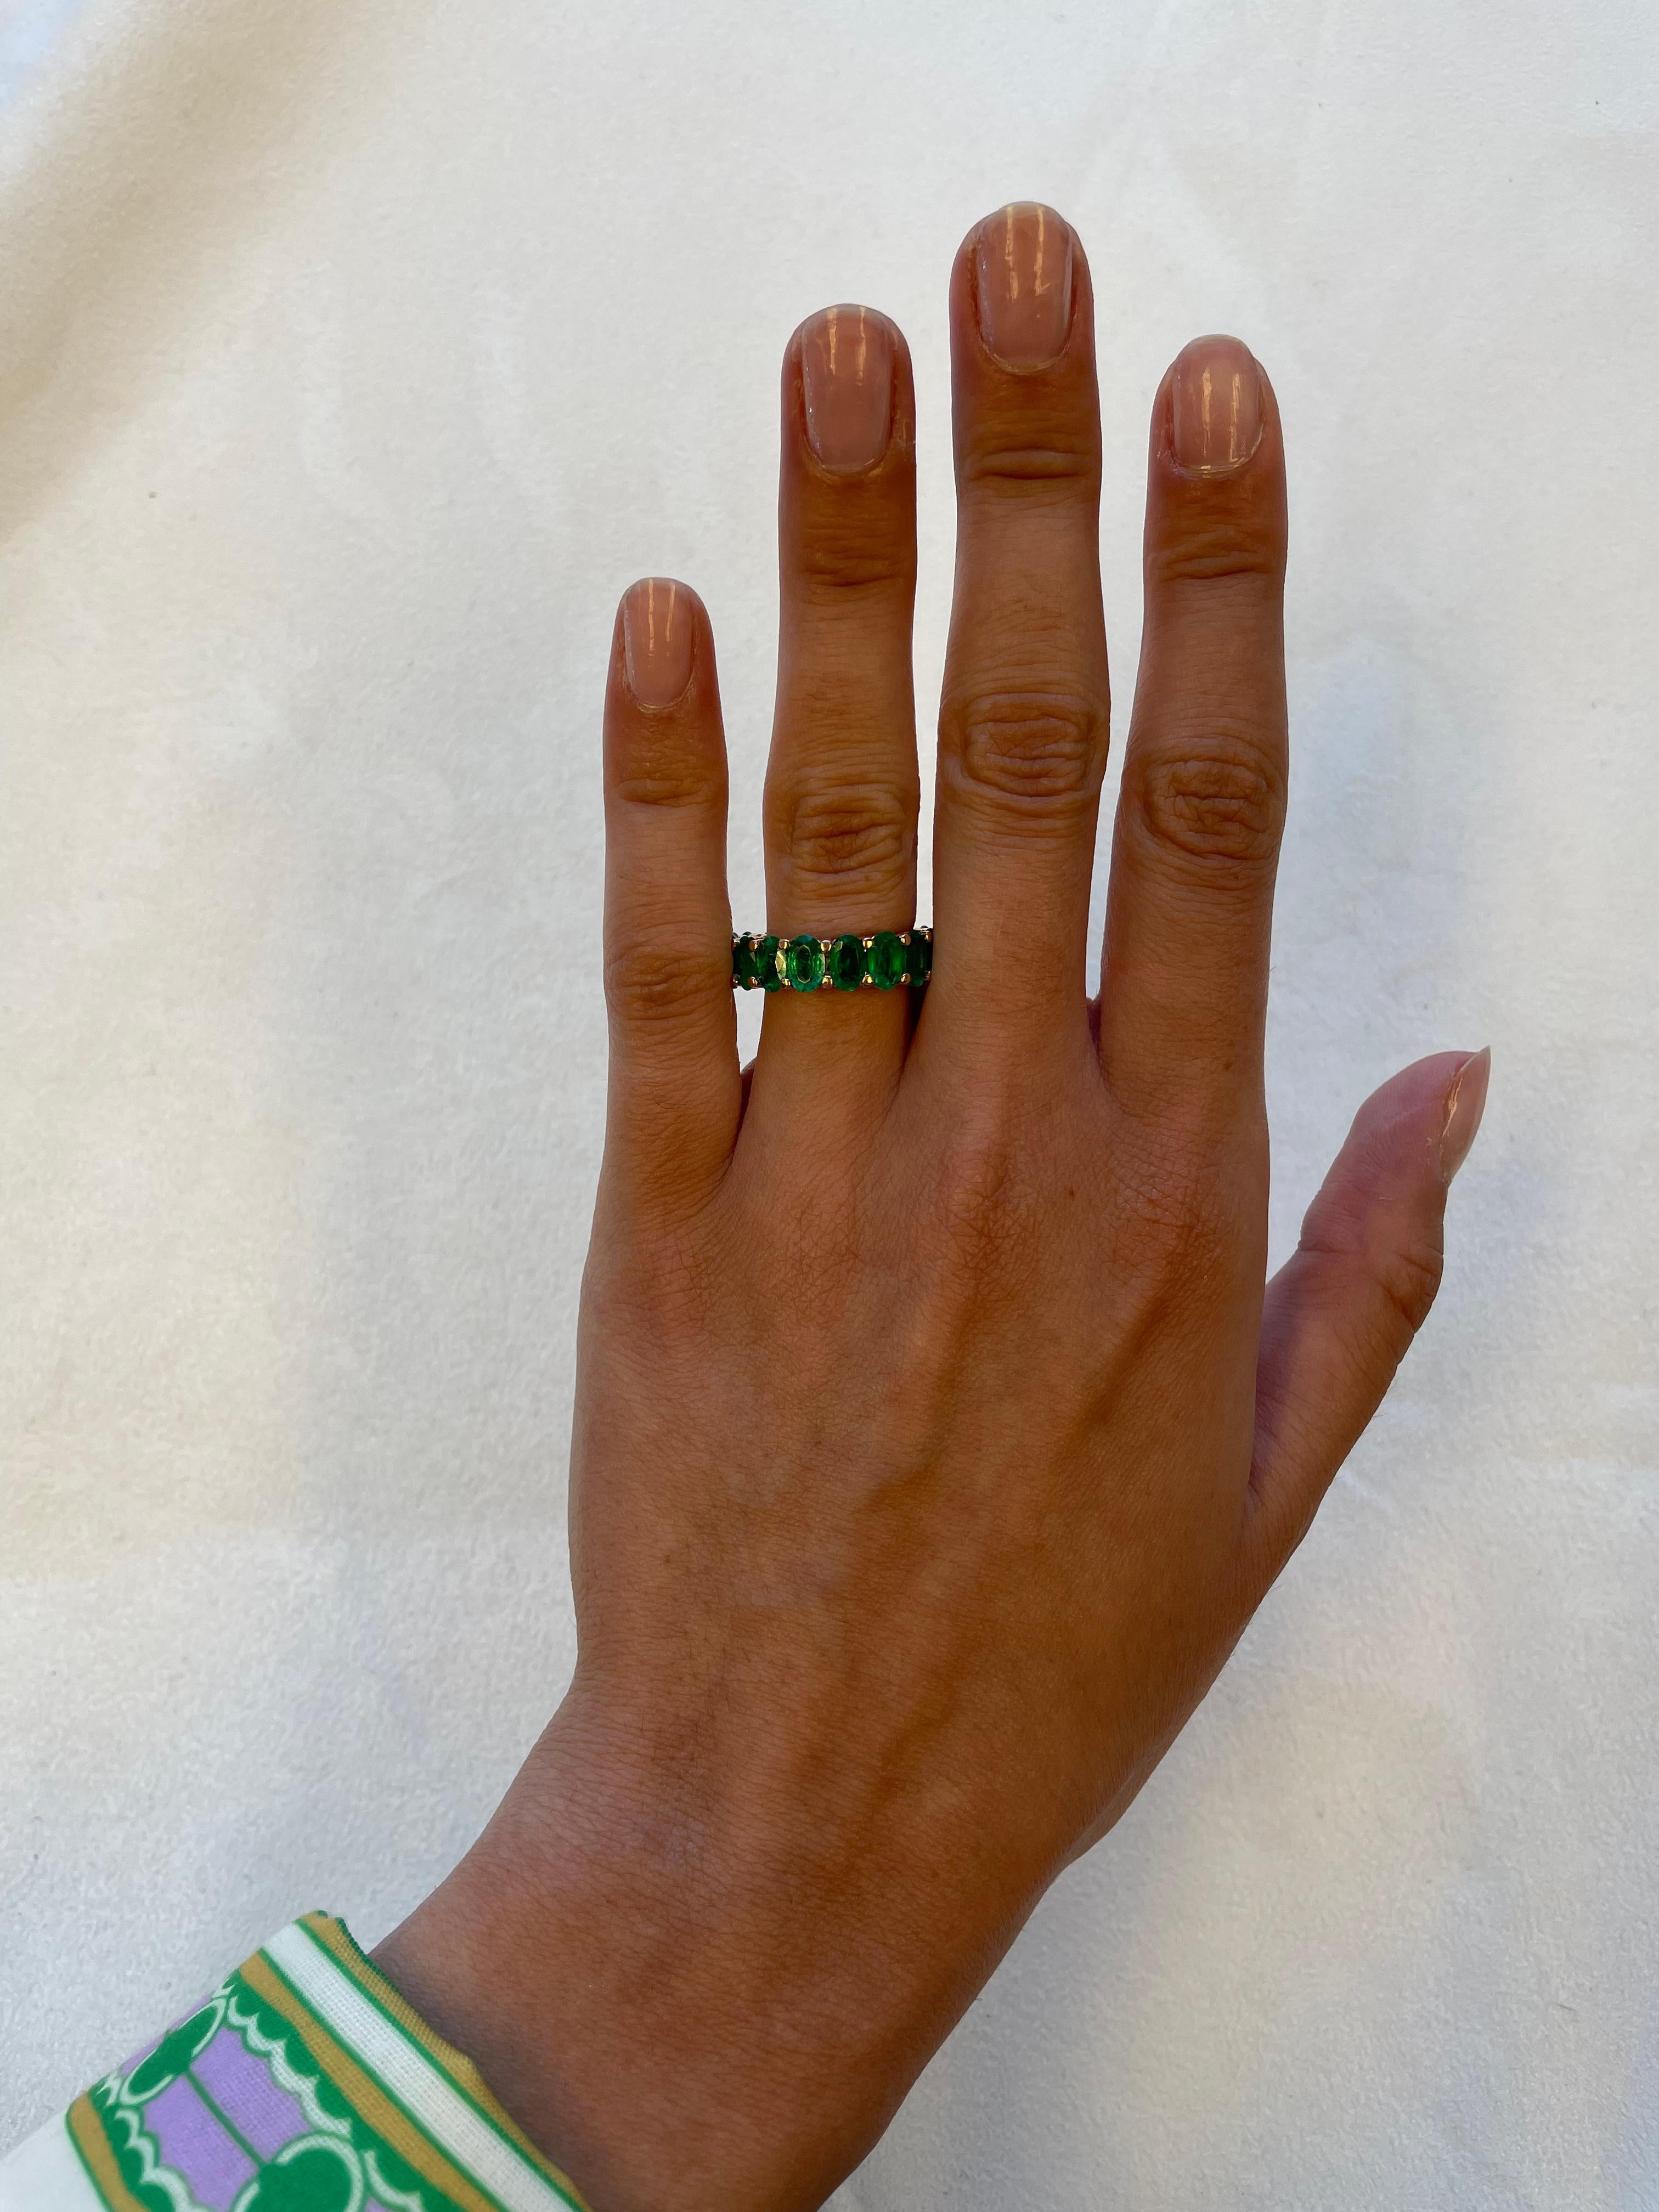 Stunning and modern emerald eternity band, By Alexander Beverly Hills.
17 oval cut emeralds, 5.65 carats, apx F2. 18-karat yellow gold, 5.42 grams, size 6.5.
Accommodated with an up-to-date appraisal by a GIA G.G. once purchased, upon request.